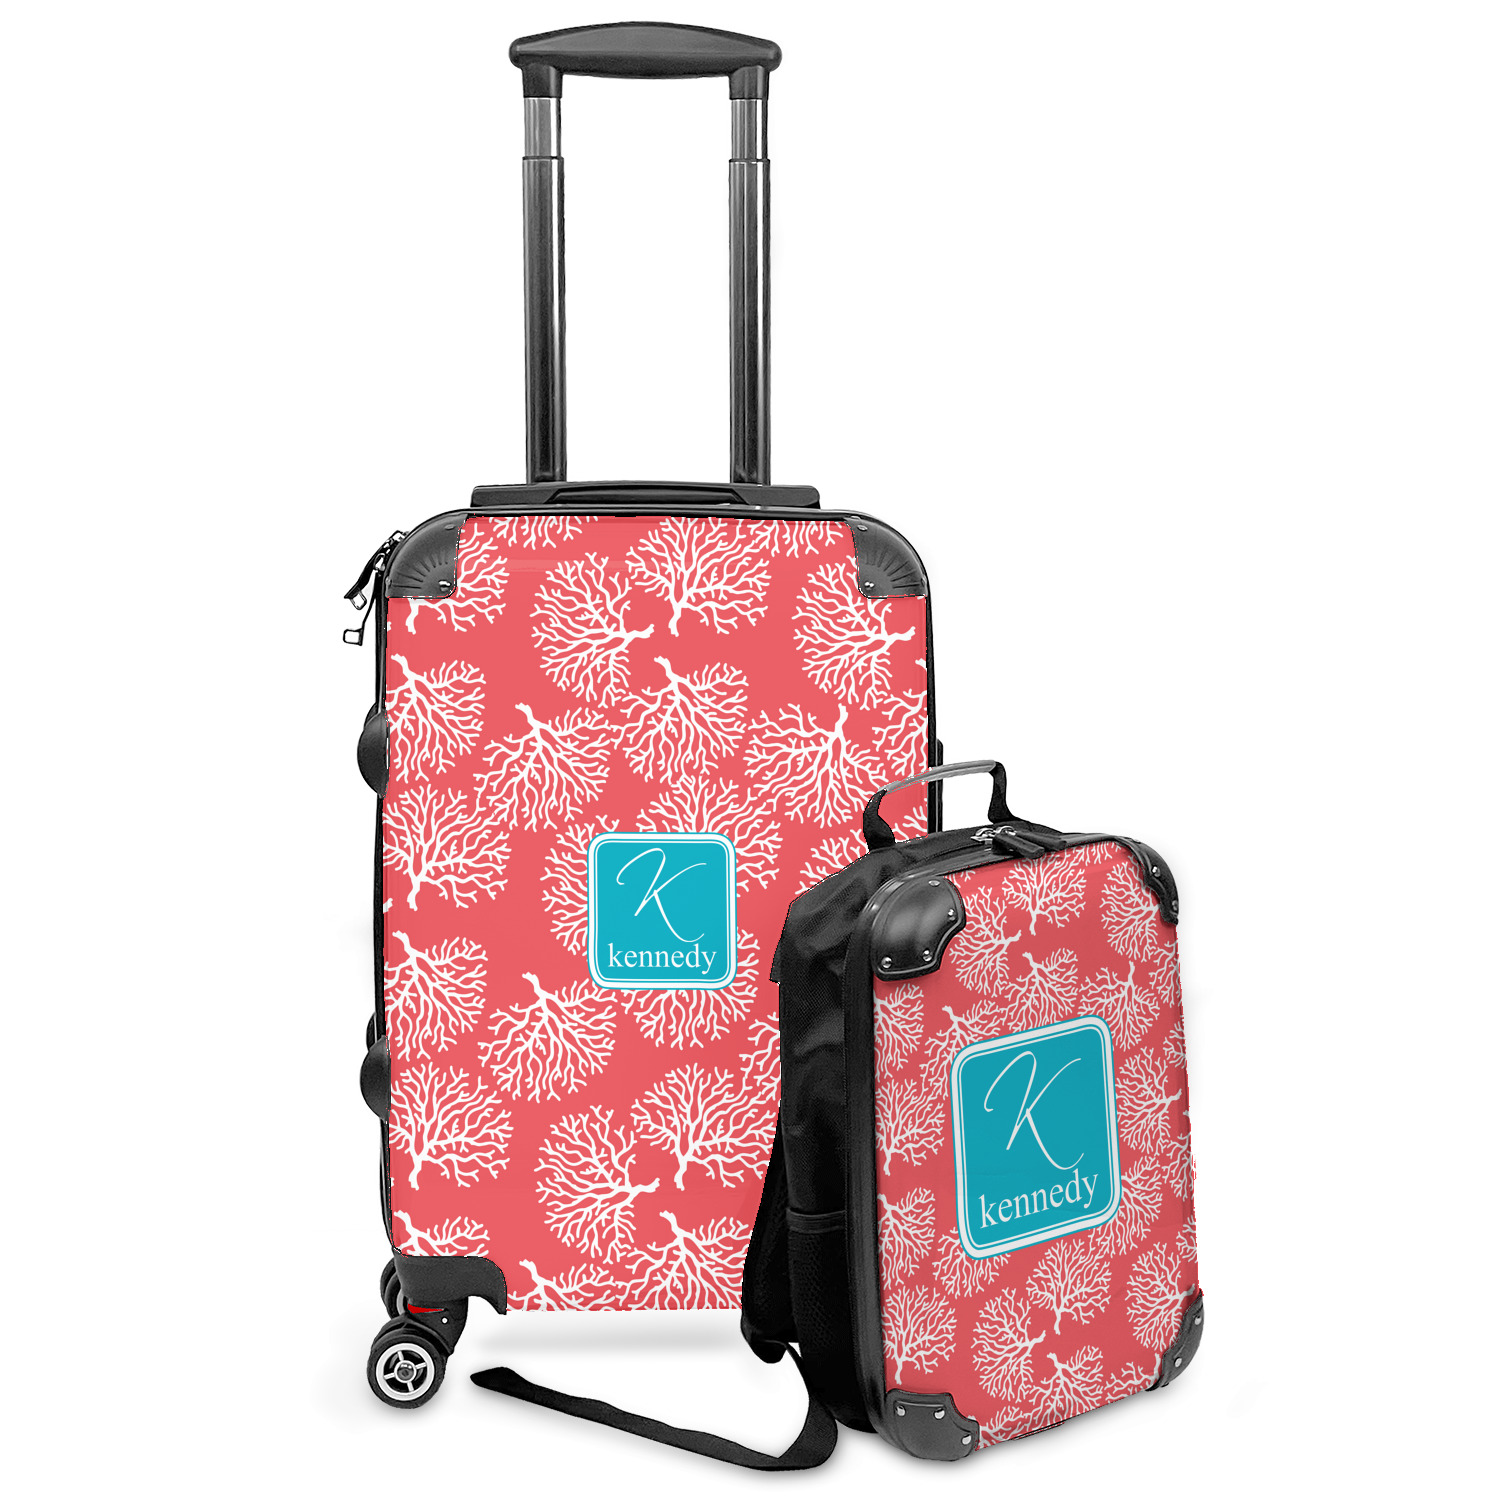 Madison Adelaide schrijven Coral & Teal Kids 2-Piece Luggage Set - Suitcase & Backpack (Personalized)  - YouCustomizeIt